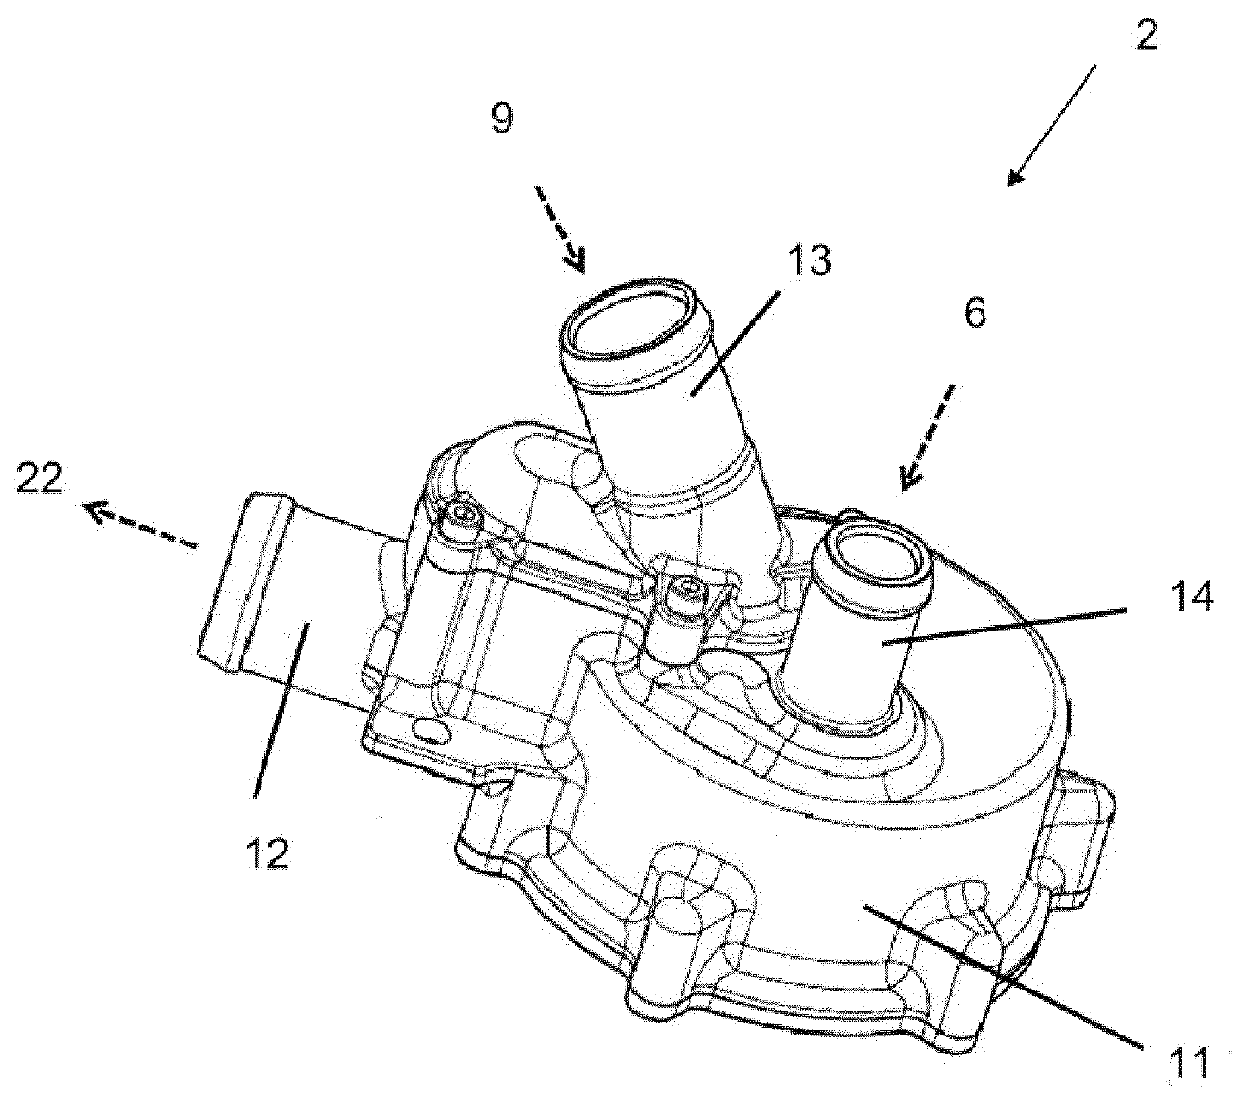 Electrically drivable valve for controlling volumetric flows in a heating and/or cooling system of a motor vehicle